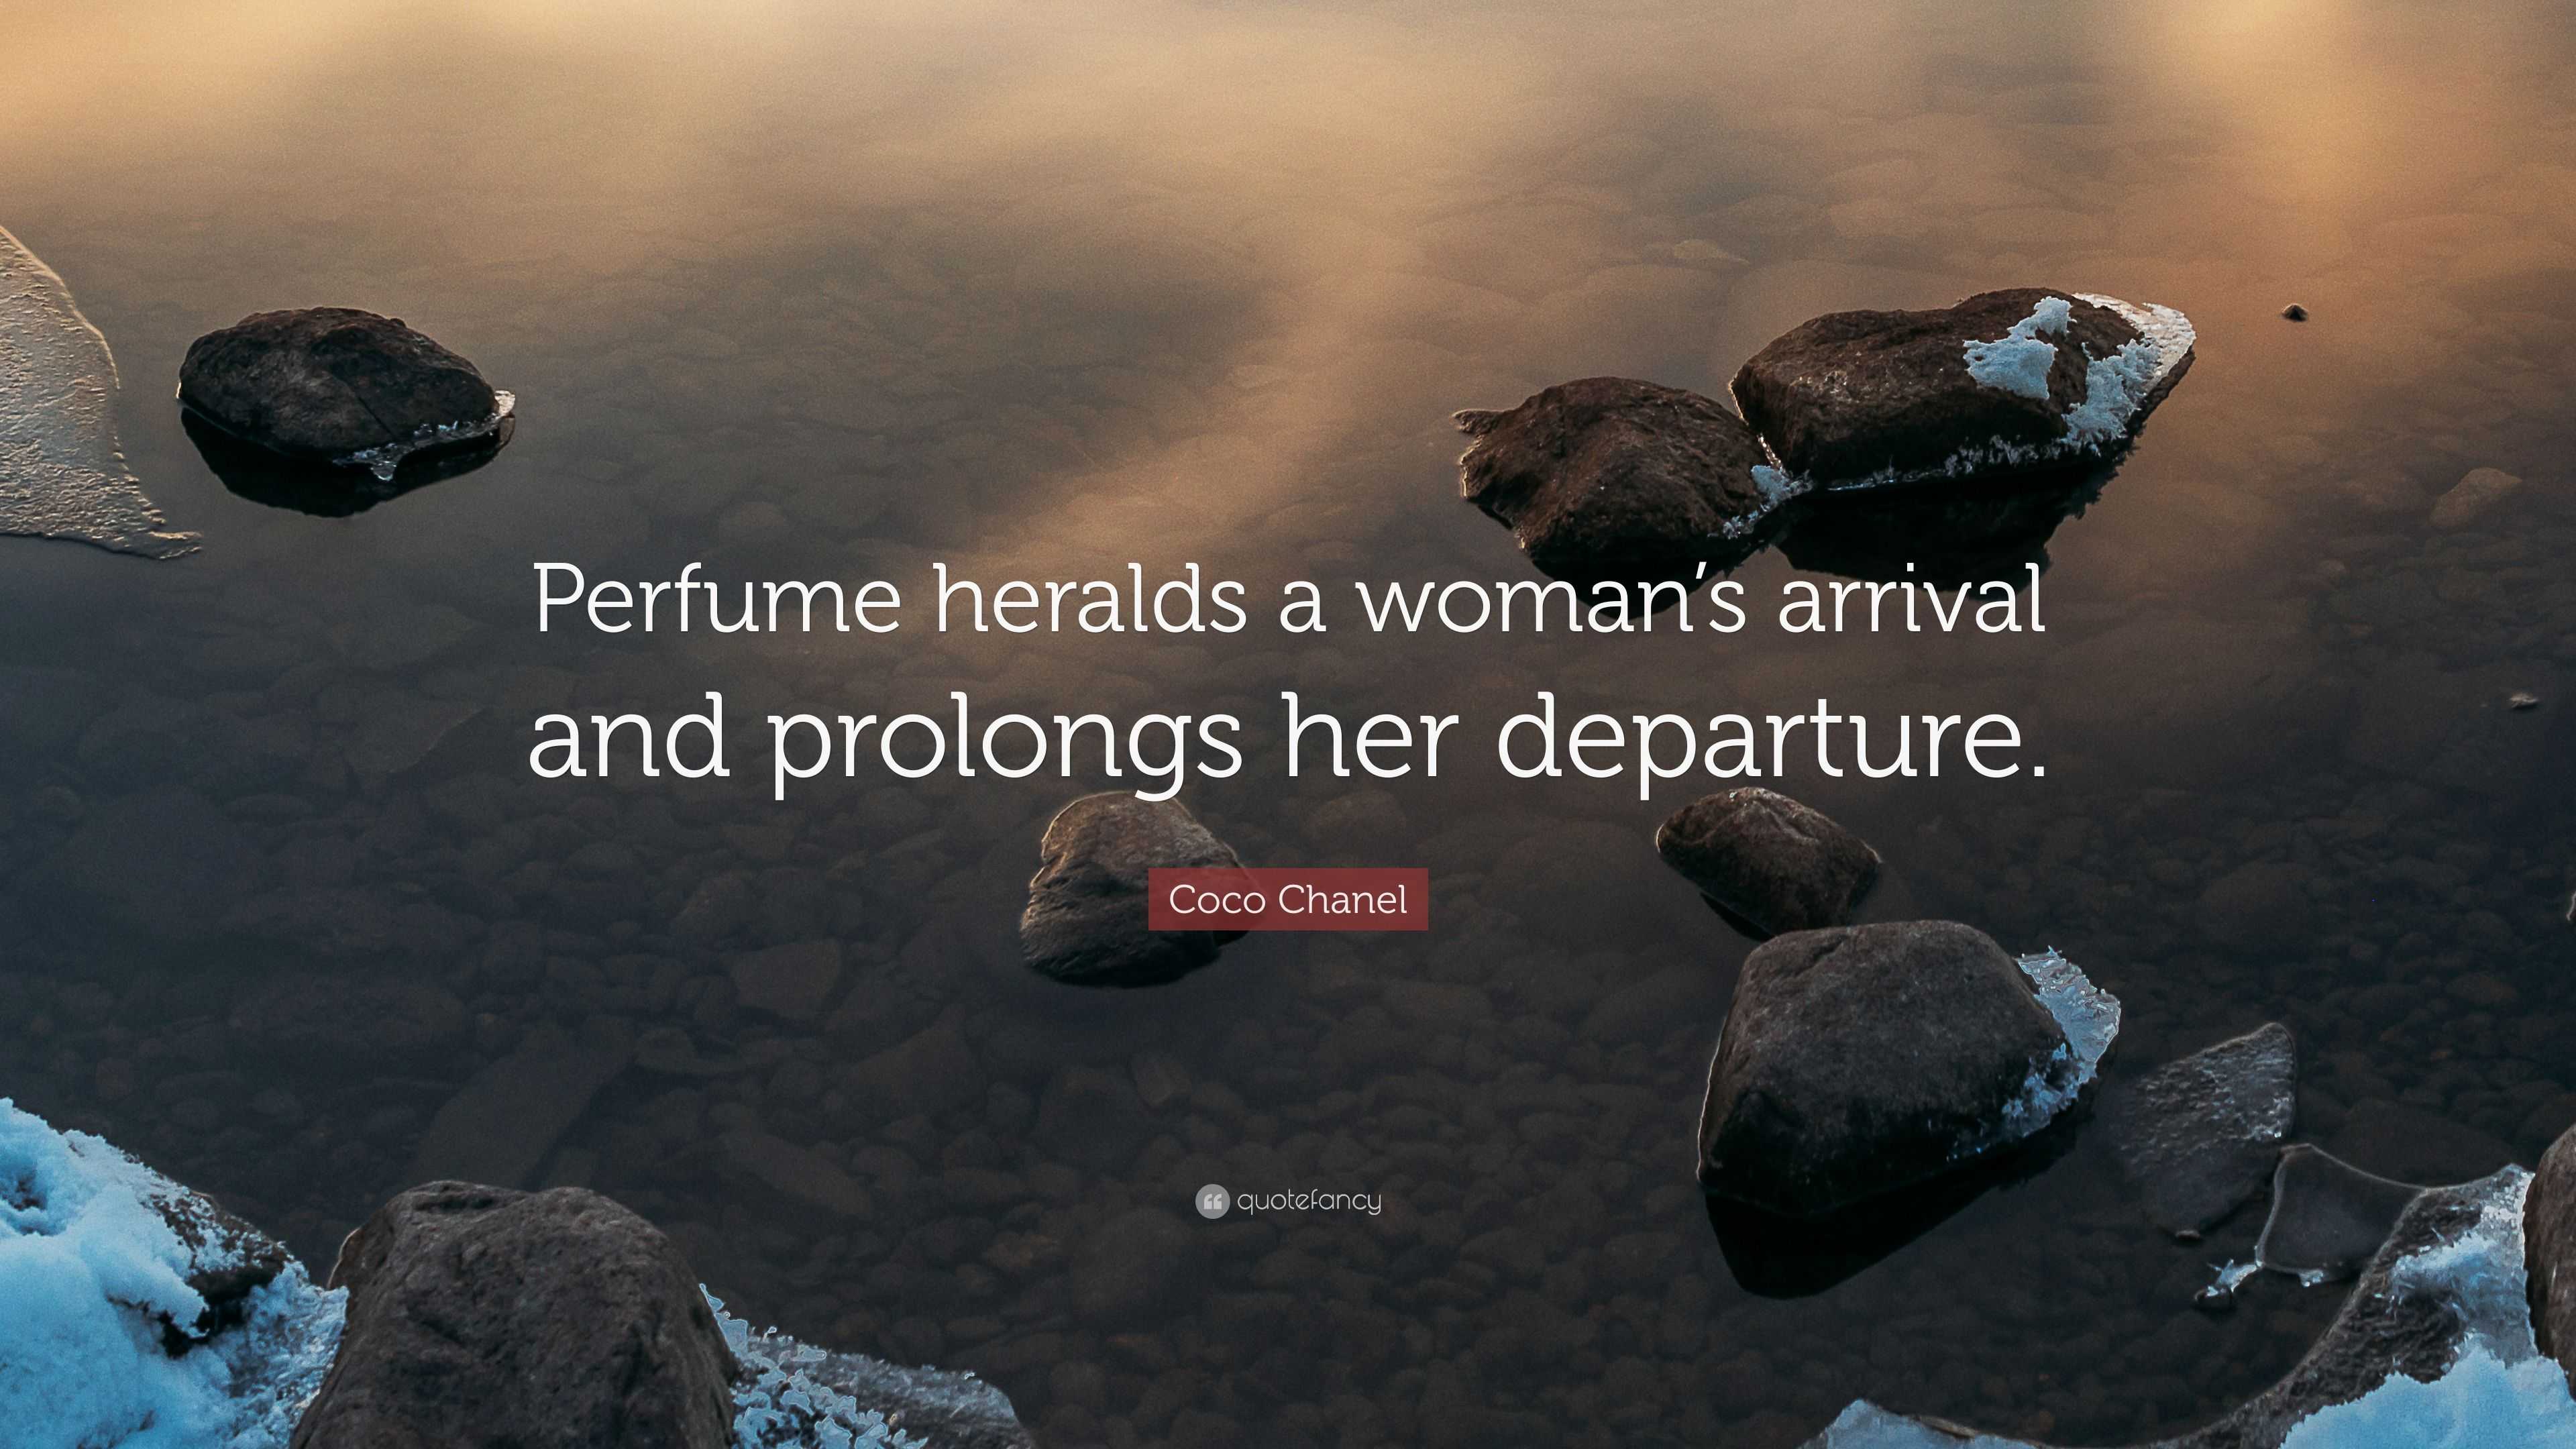 Coco Chanel Quote: “Perfume heralds a woman's arrival and prolongs